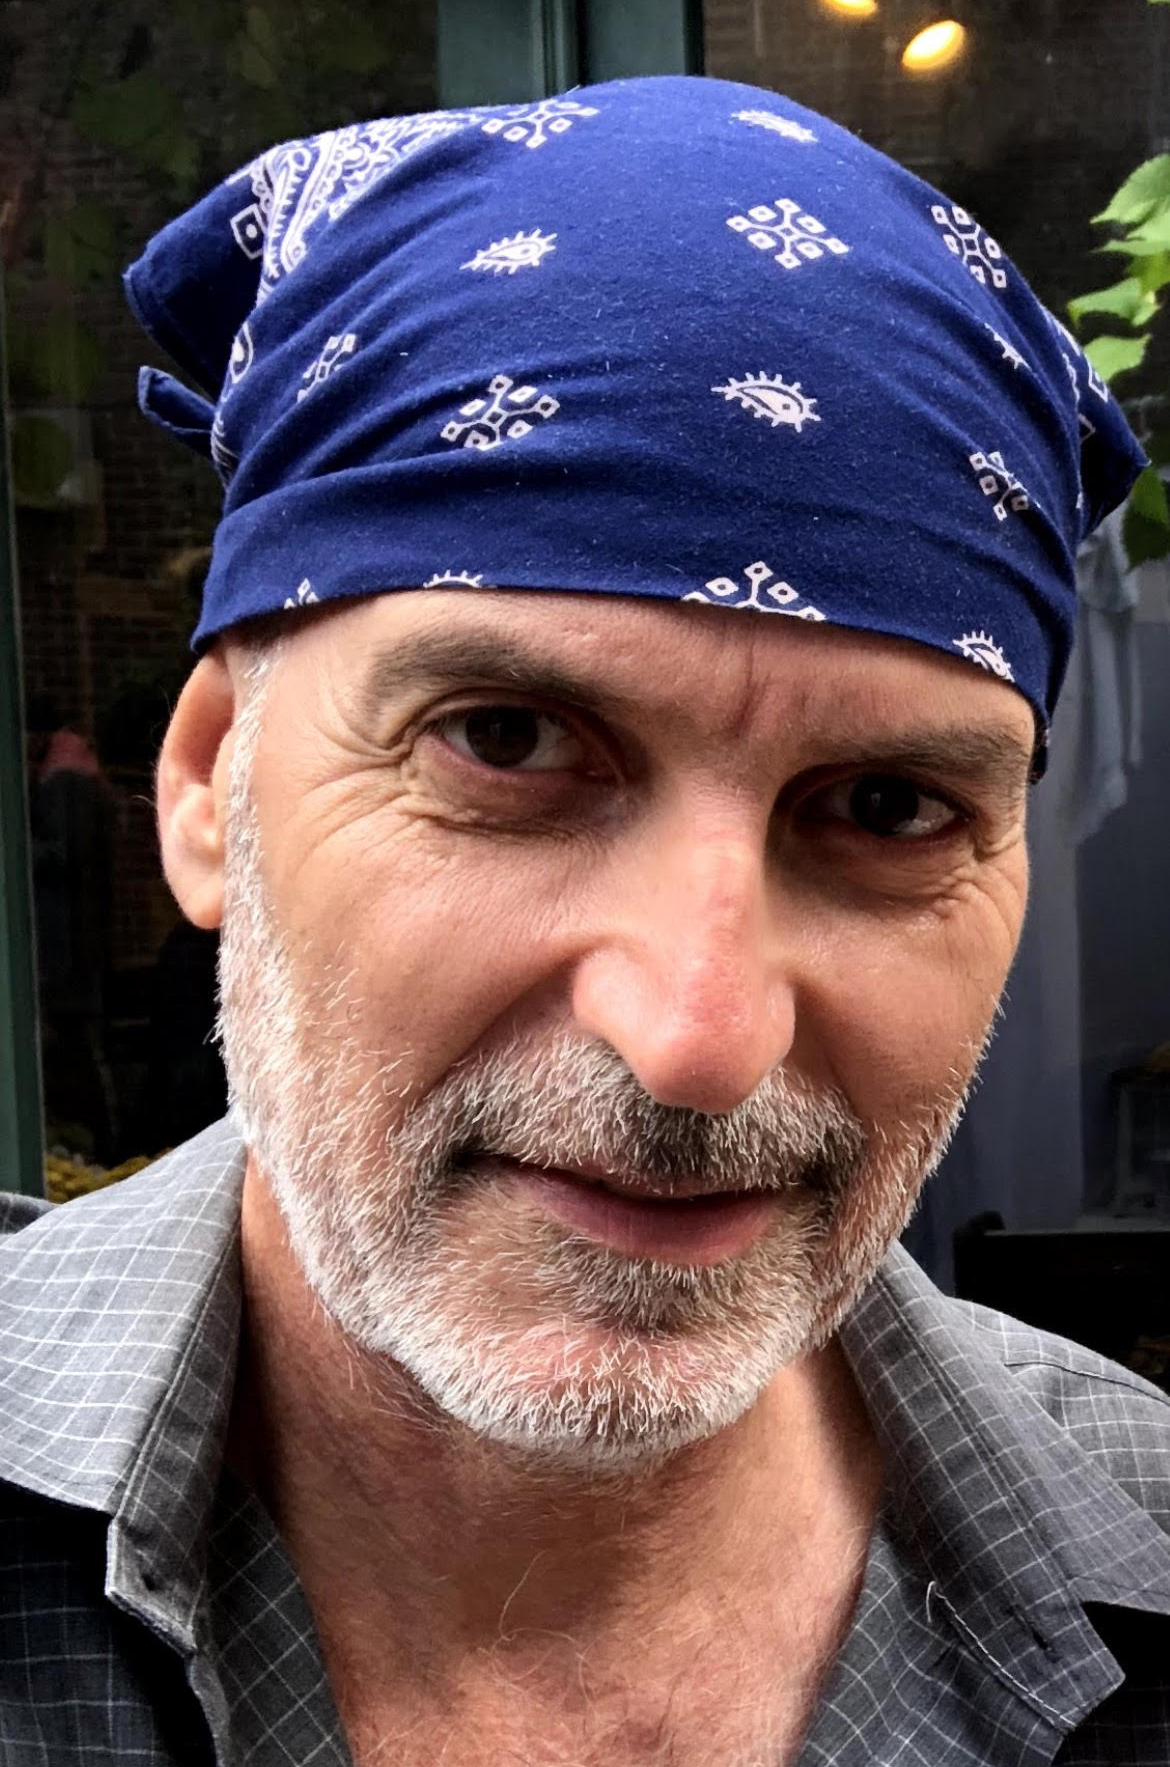 older man with slight beard, looking directly at camera and wearing a bandana on his head